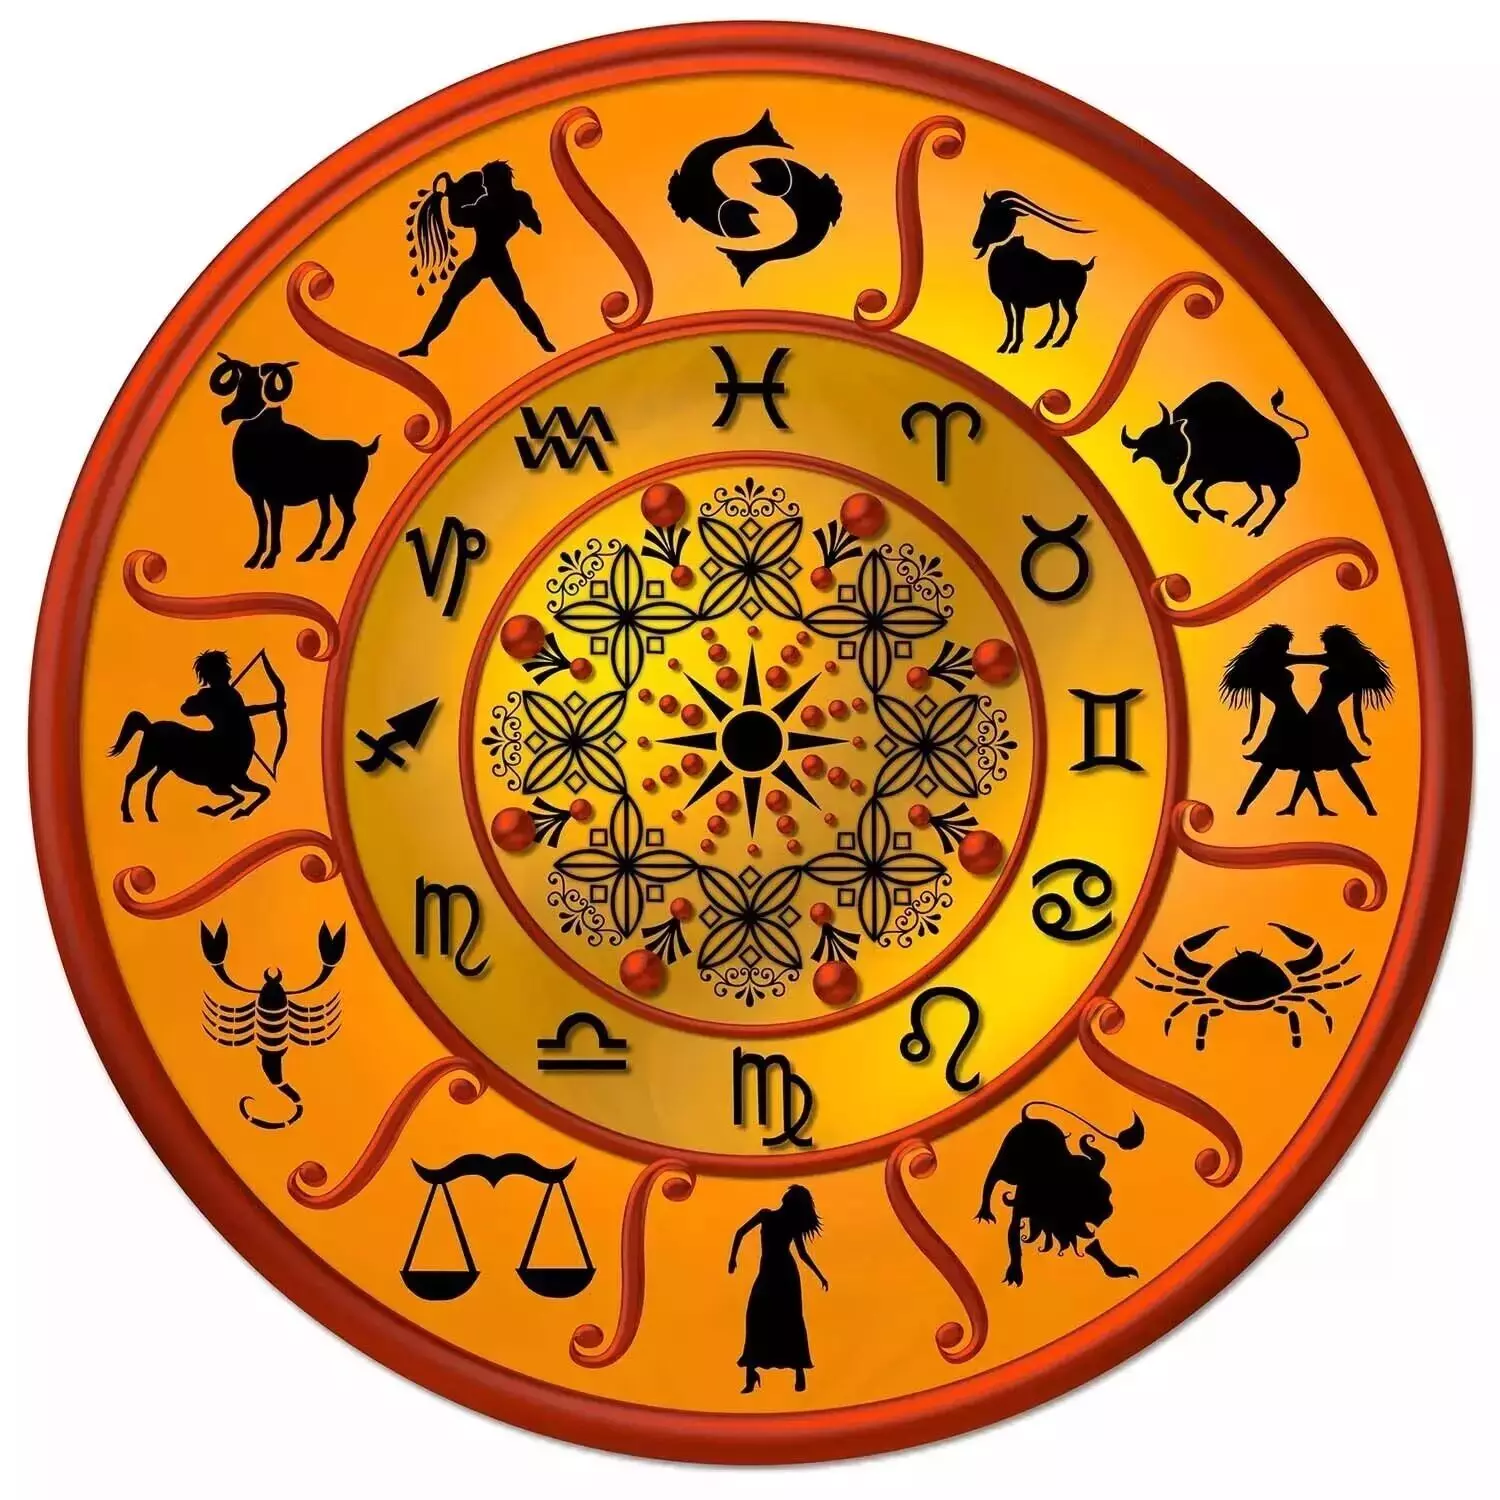 19 December – Know your todays horoscope